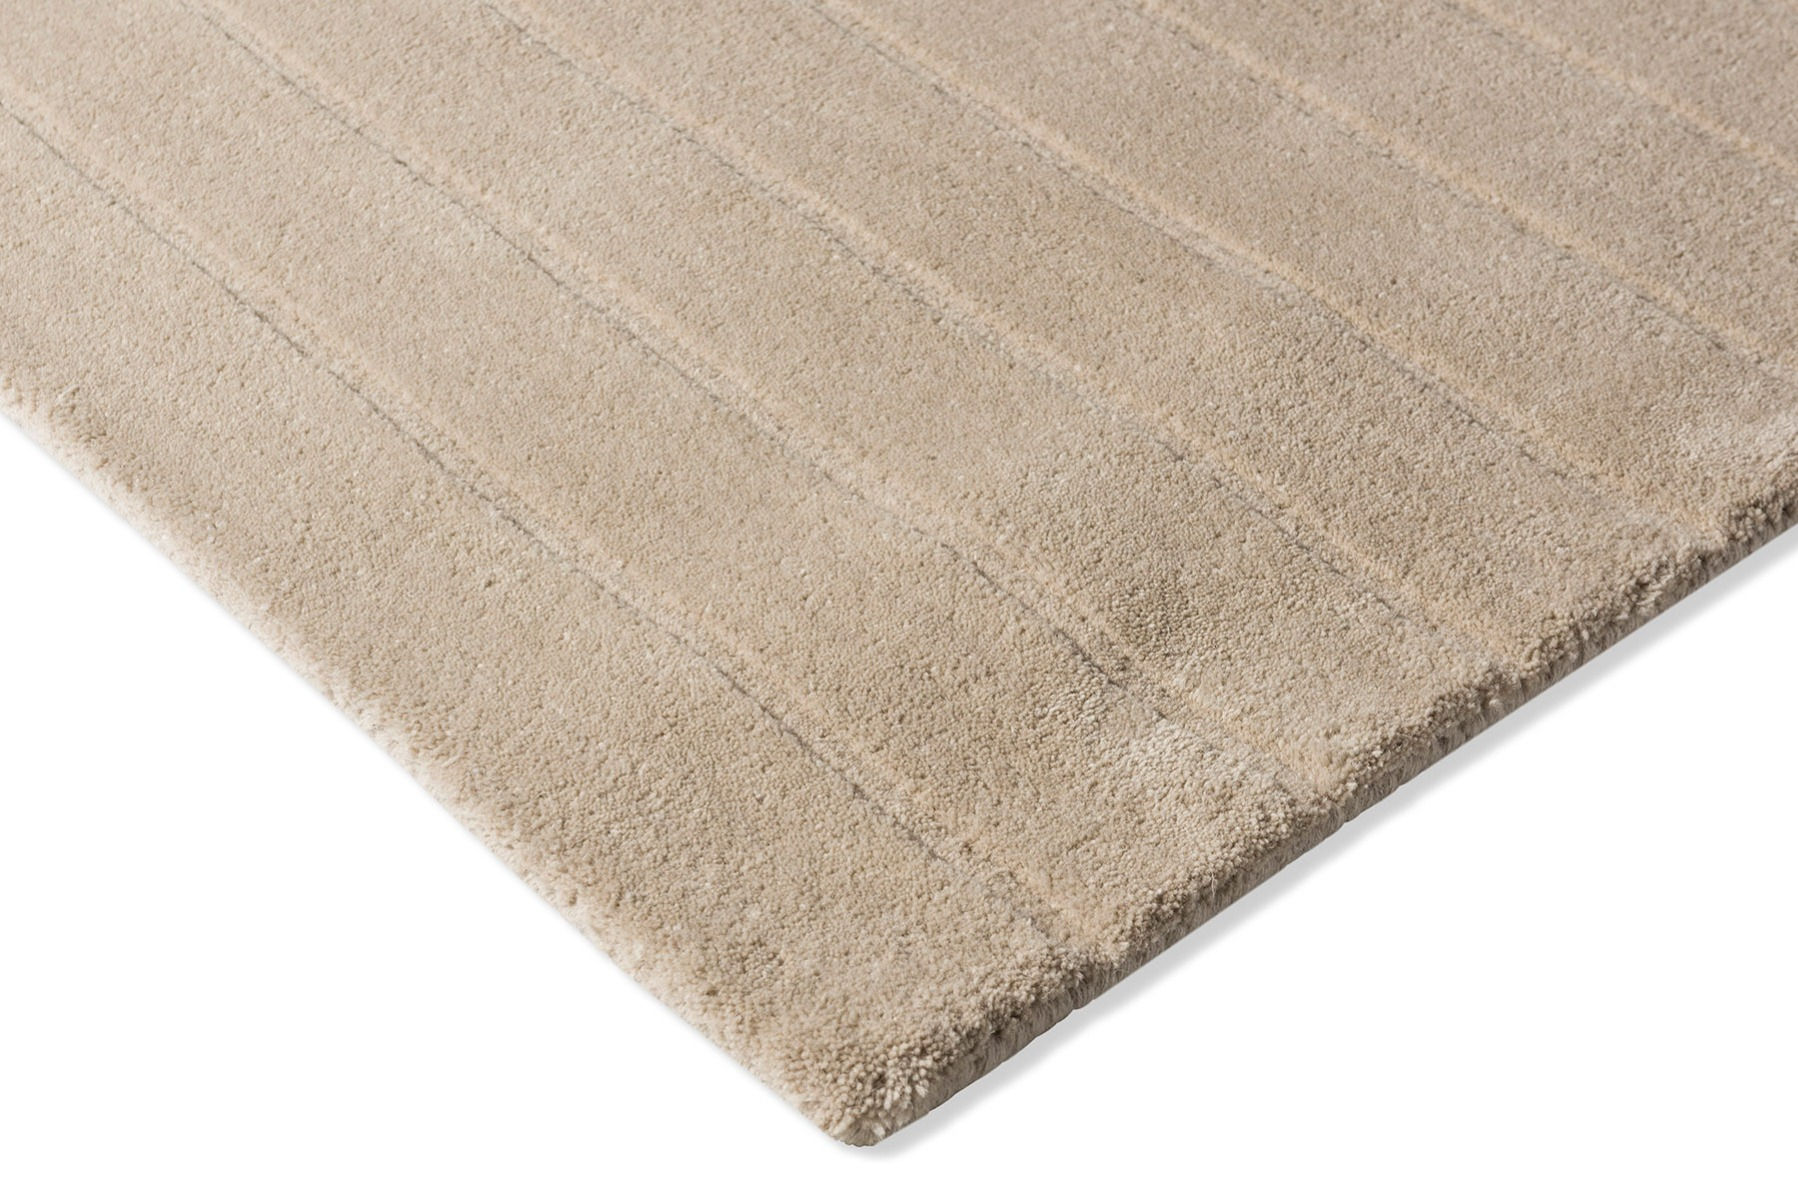 Decor Dune Oyster Handwoven Rug ☞ Size: 4' 7" x 6' 7" (140 x 200 cm)